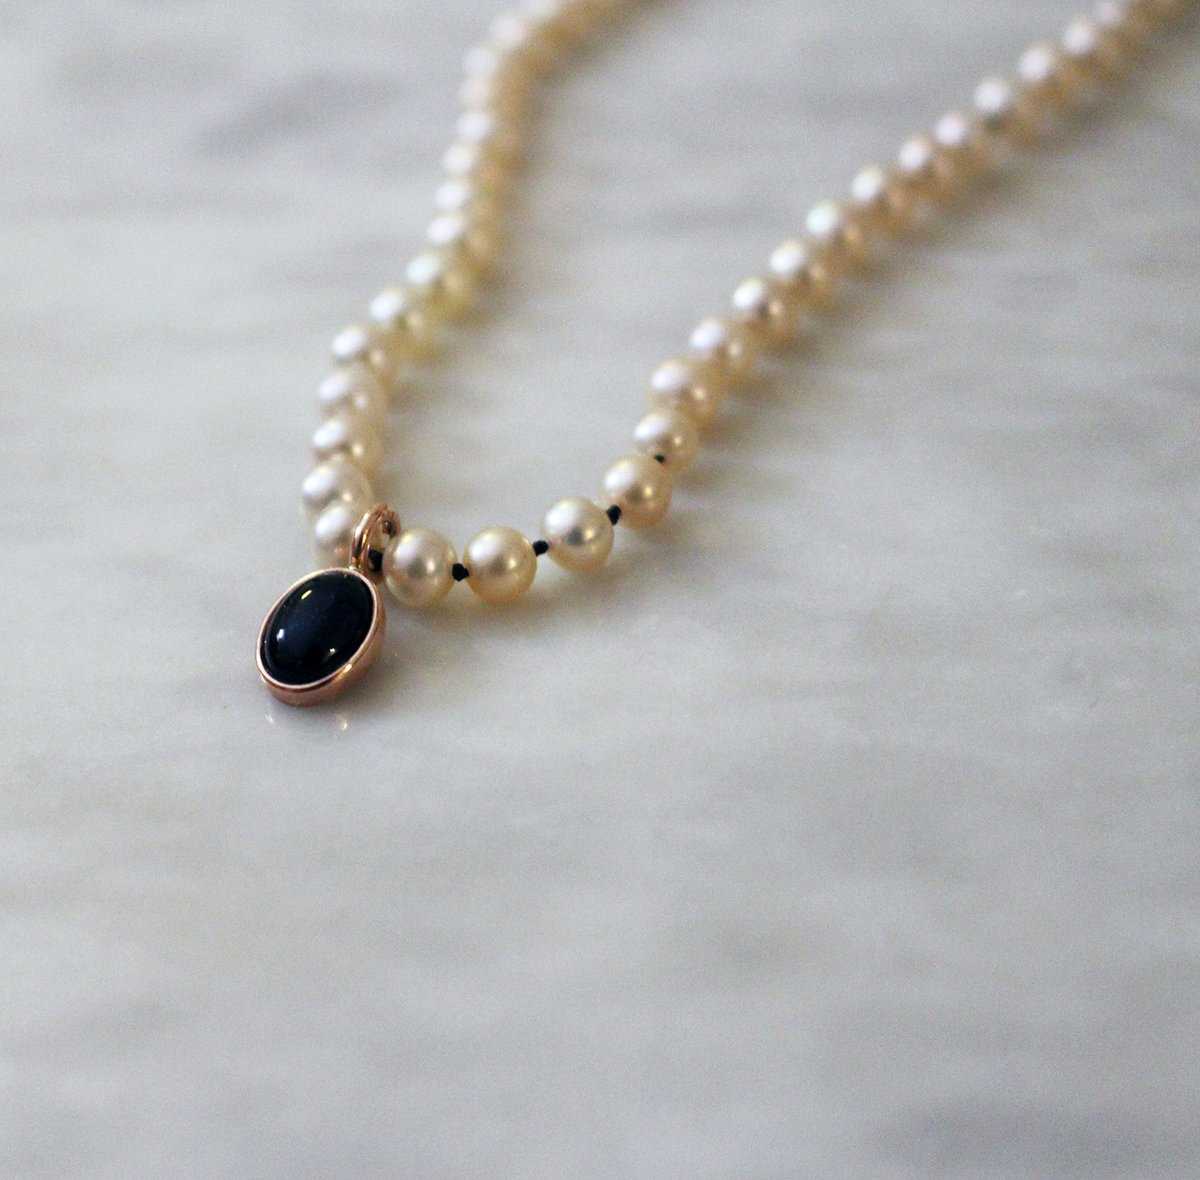 Image of victorian pearl choker with onyx pendant